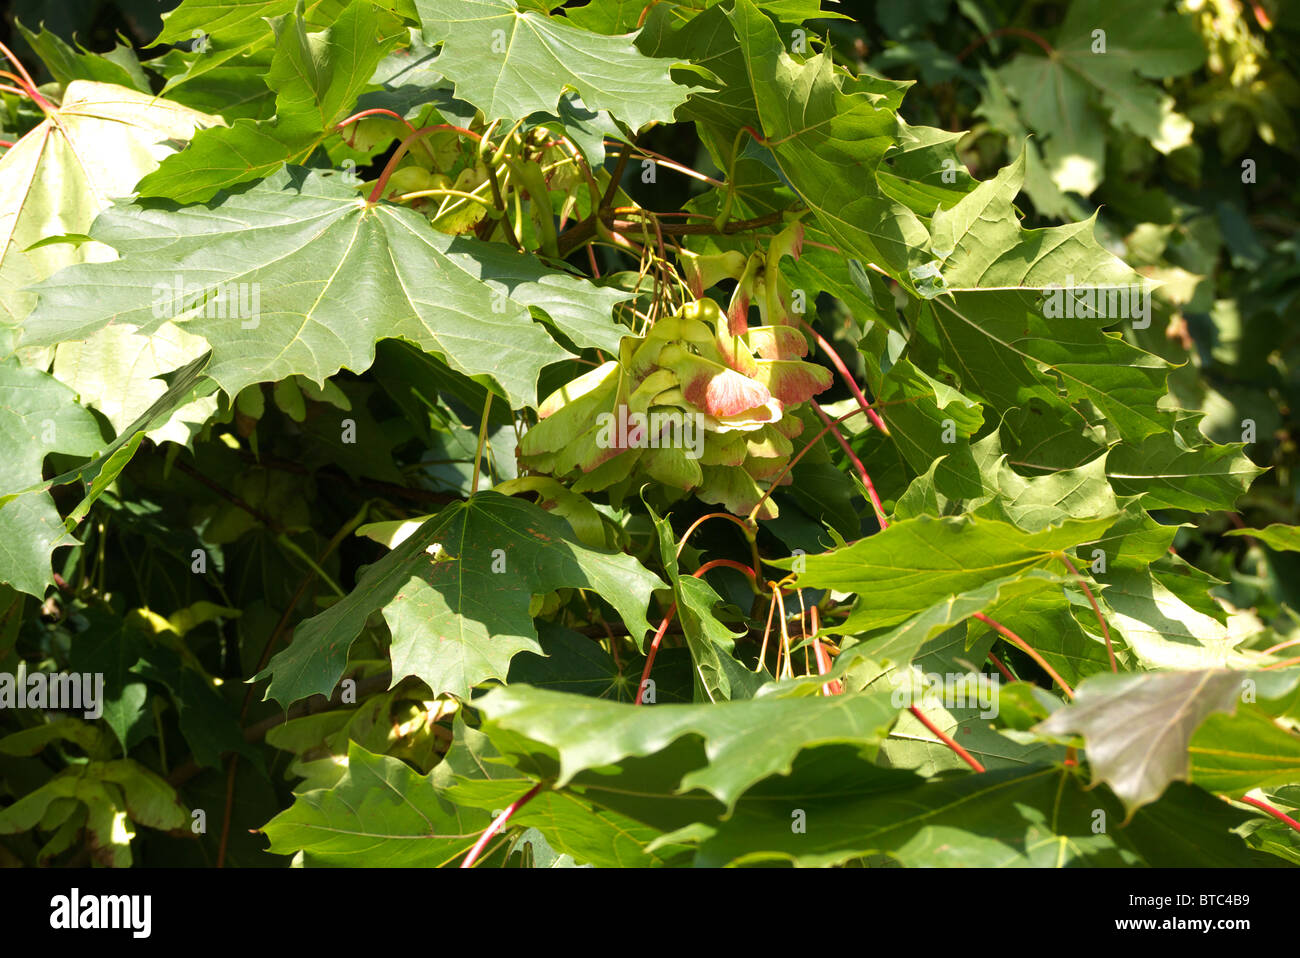 The Sycamore tree in full fruit. Stock Photo